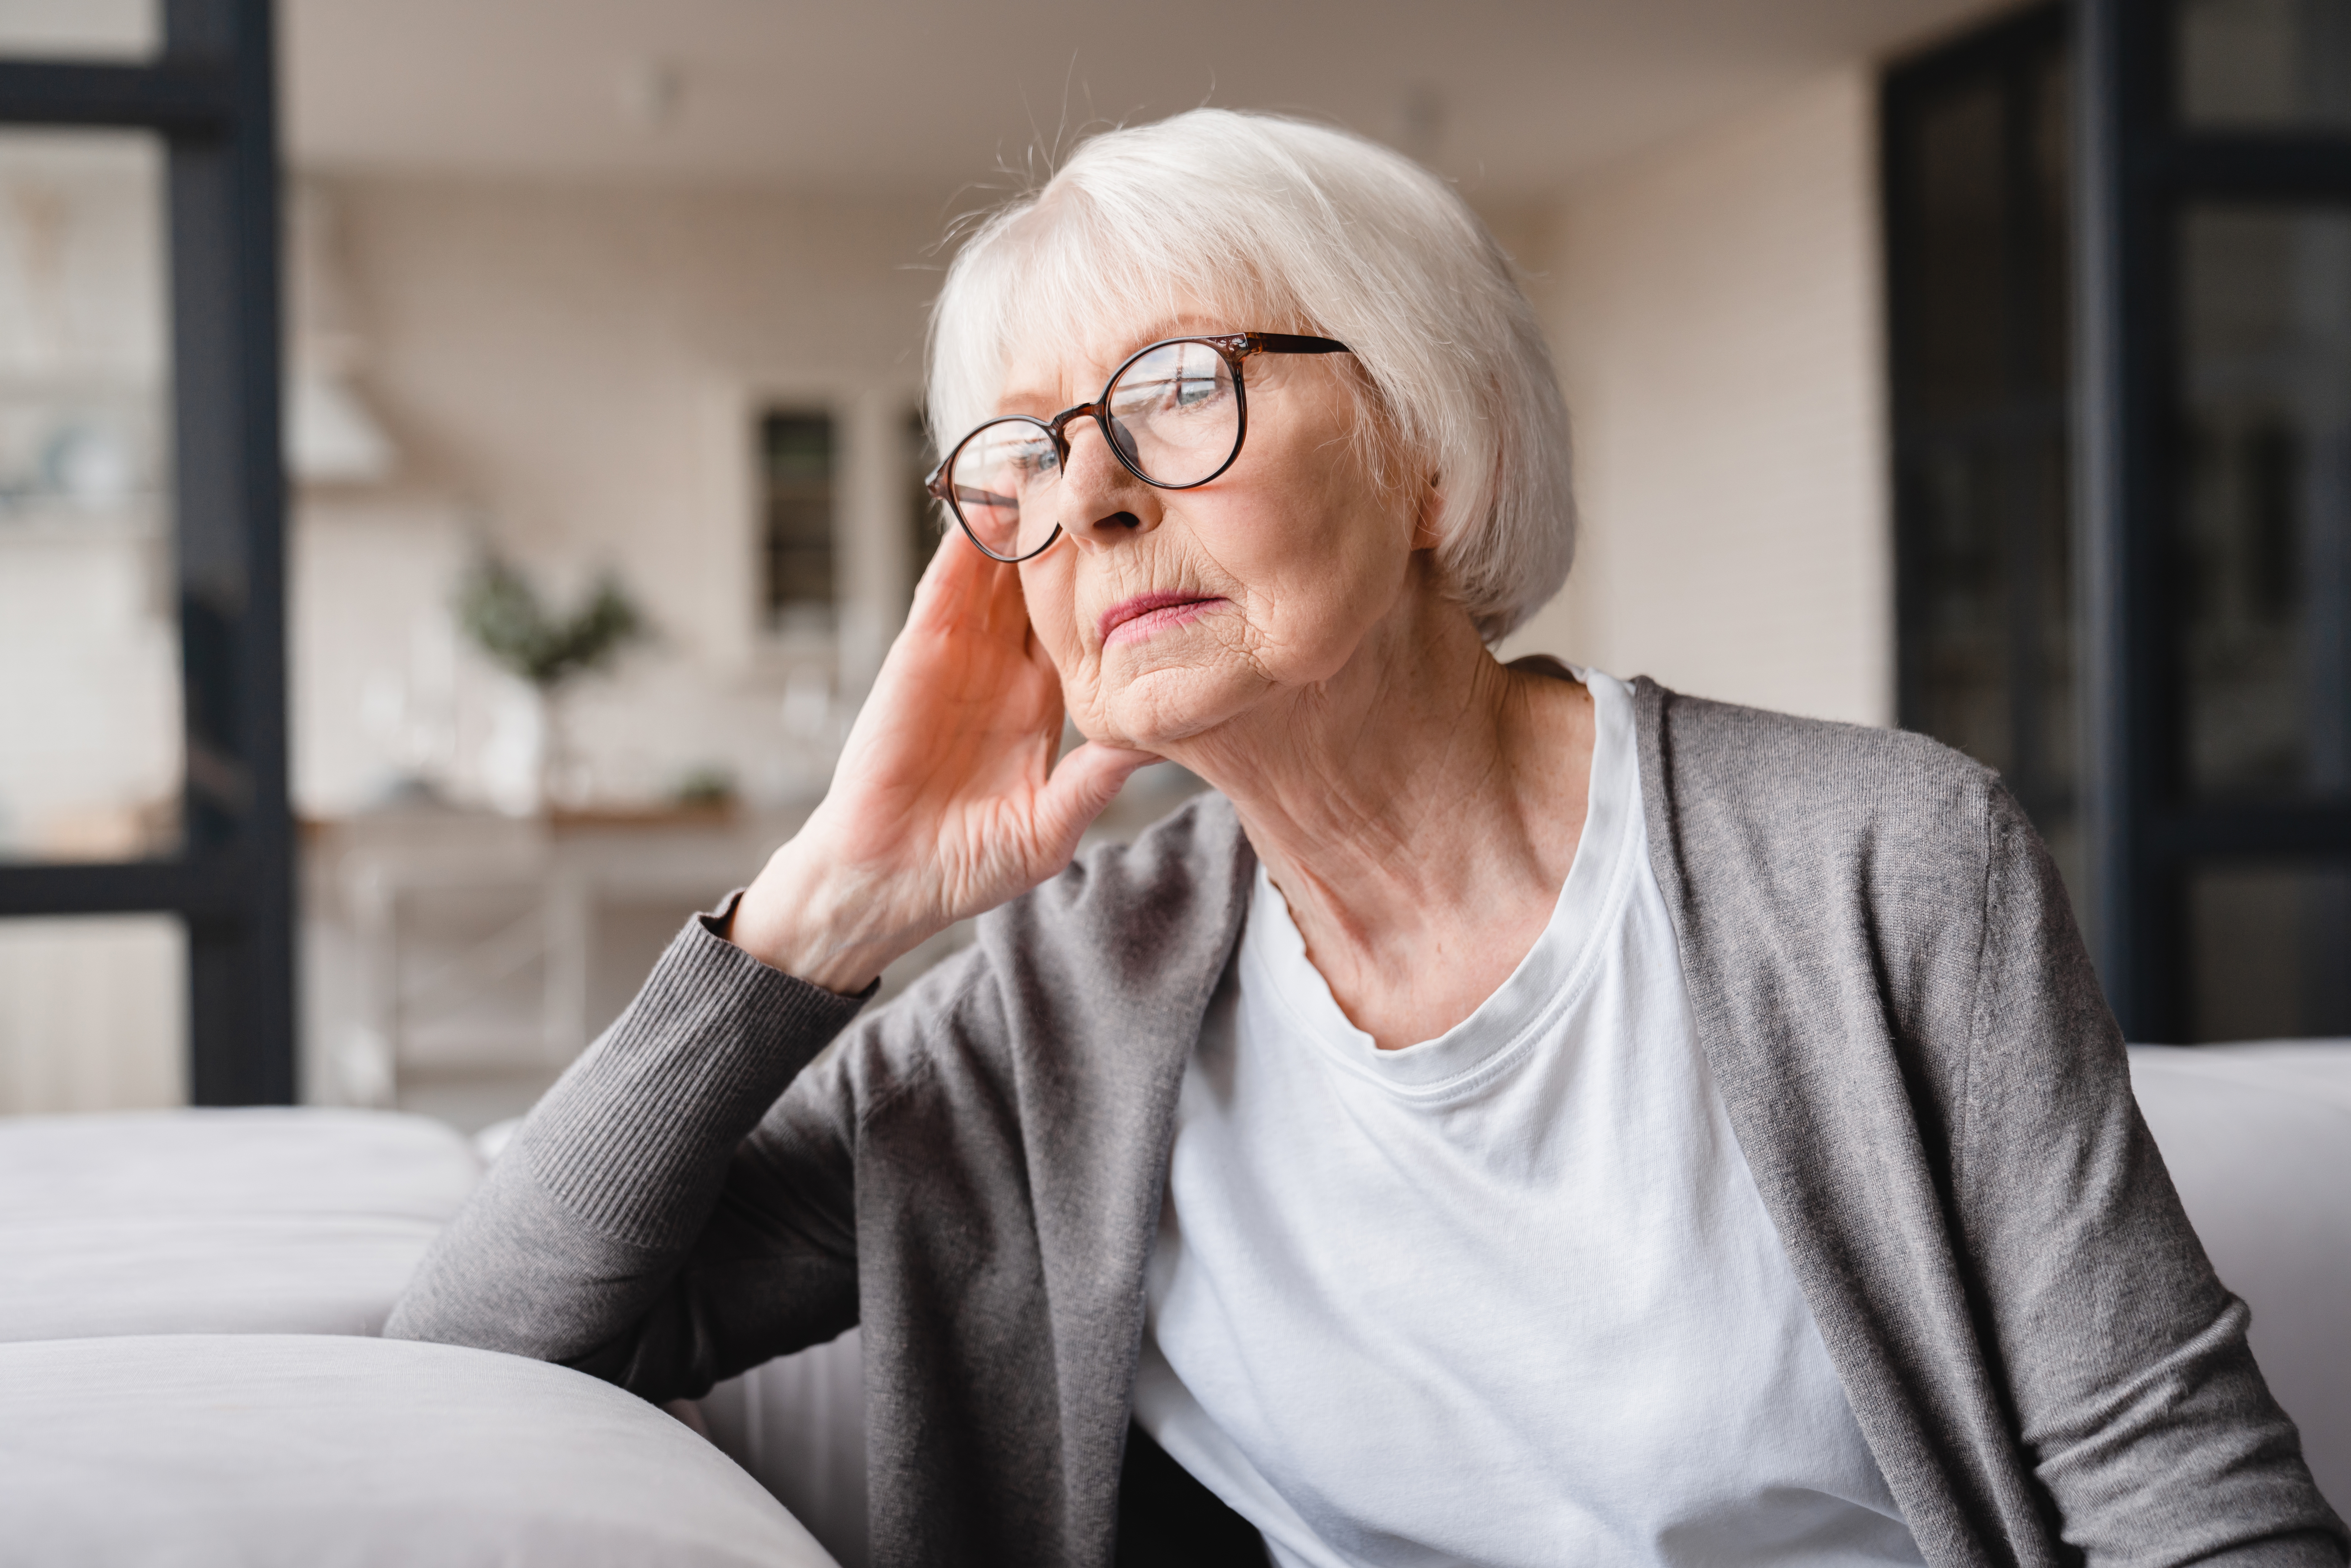 An older woman sitting on a couch | Source: Shutterstock